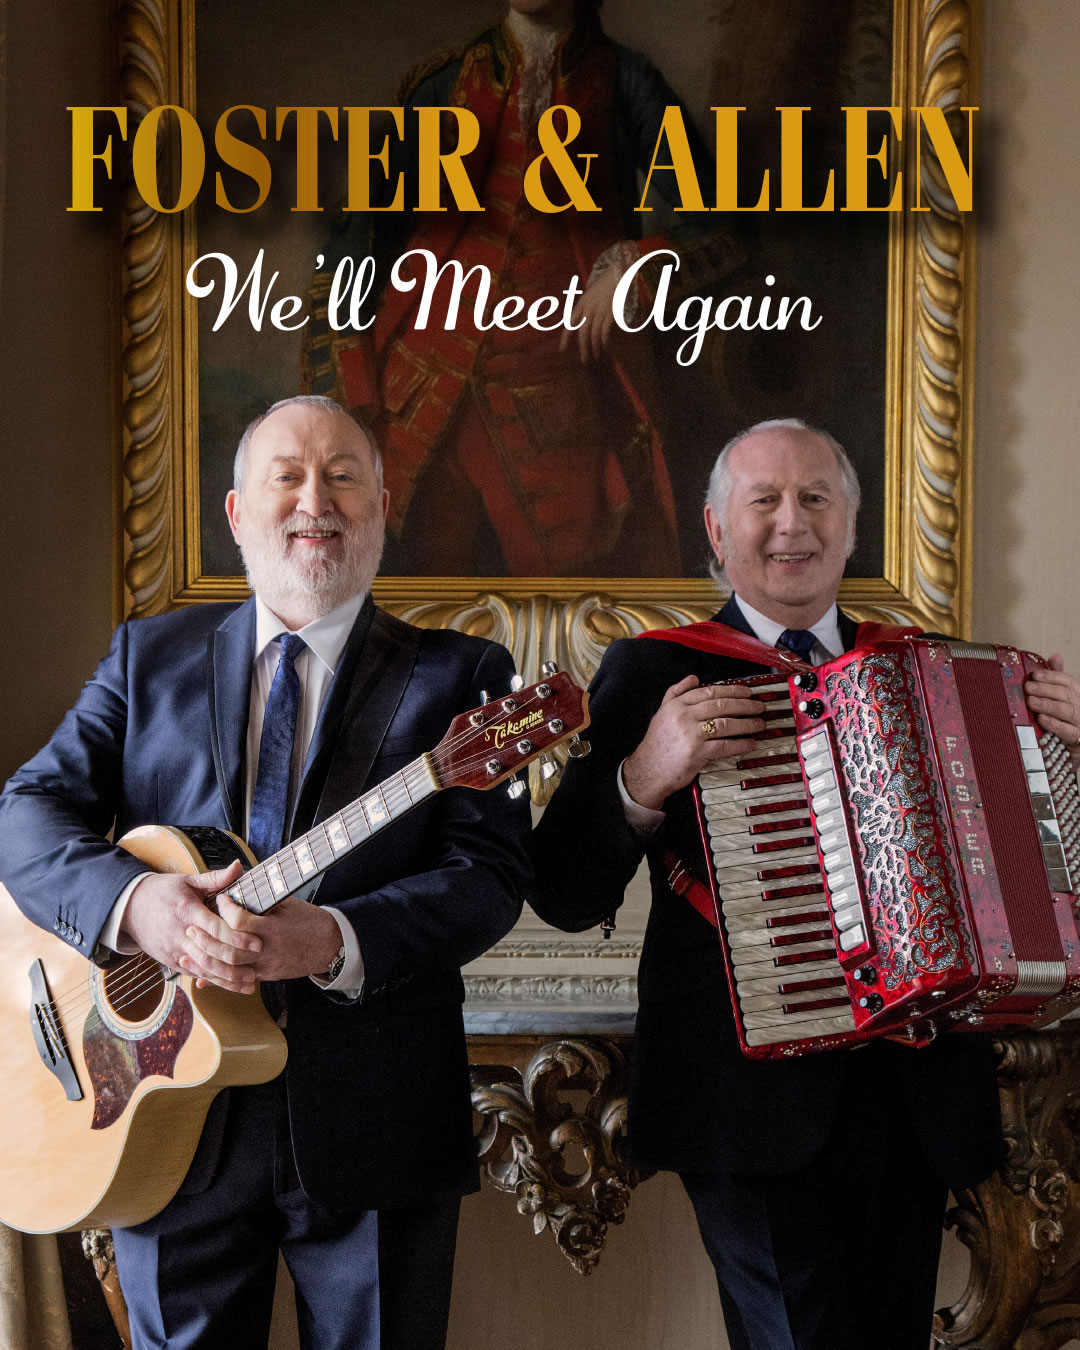 Book Foster & Allen for your event with David Hull Promotions Belfast, Northern Ireland